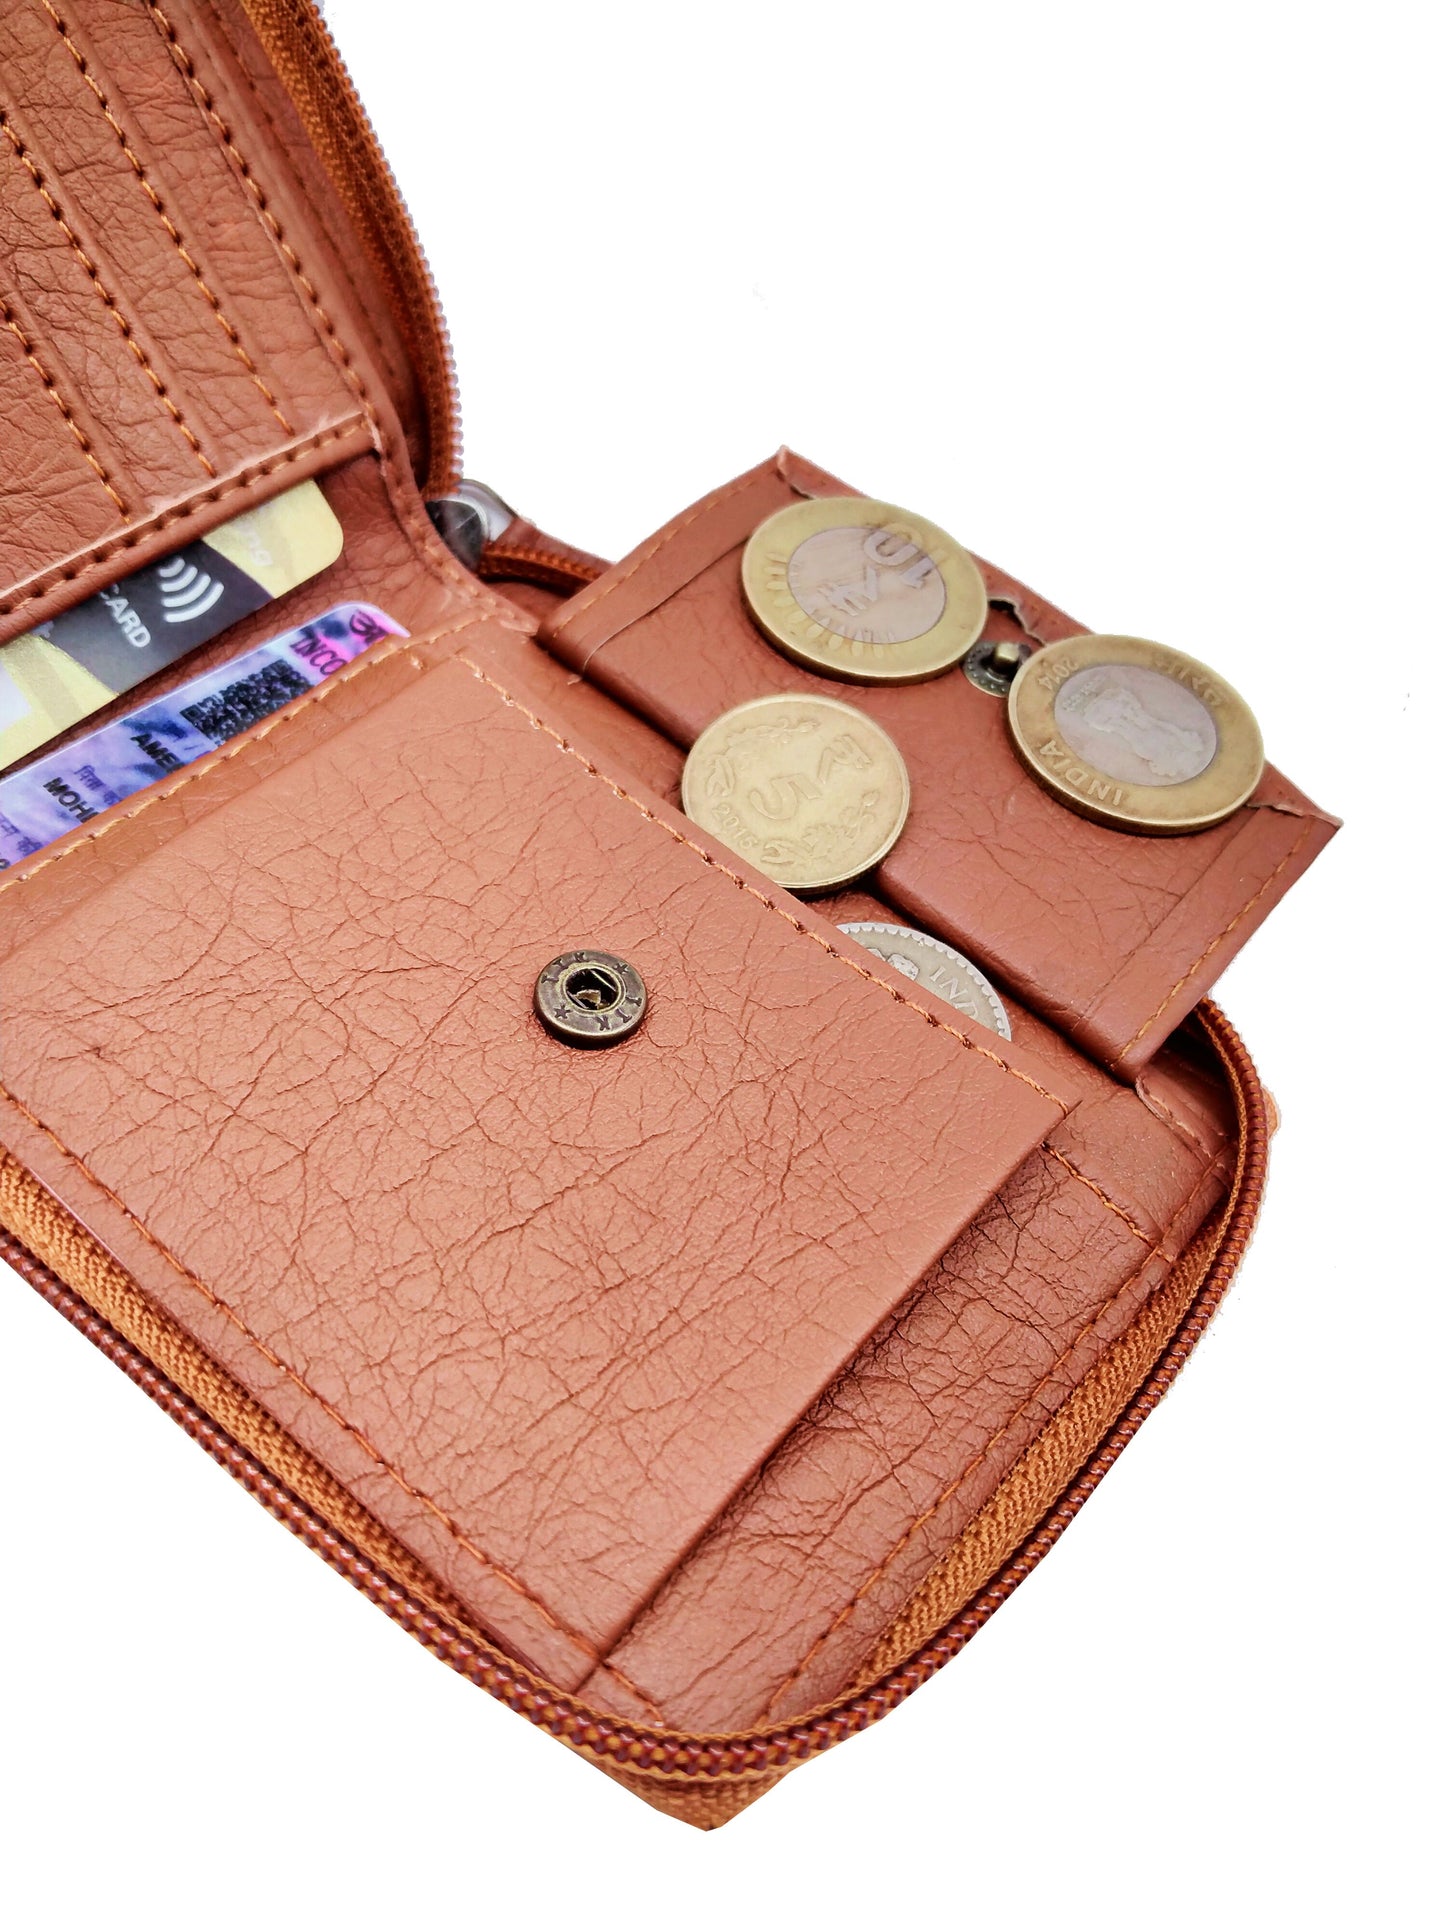 KnW Wallet Leather tan round zip